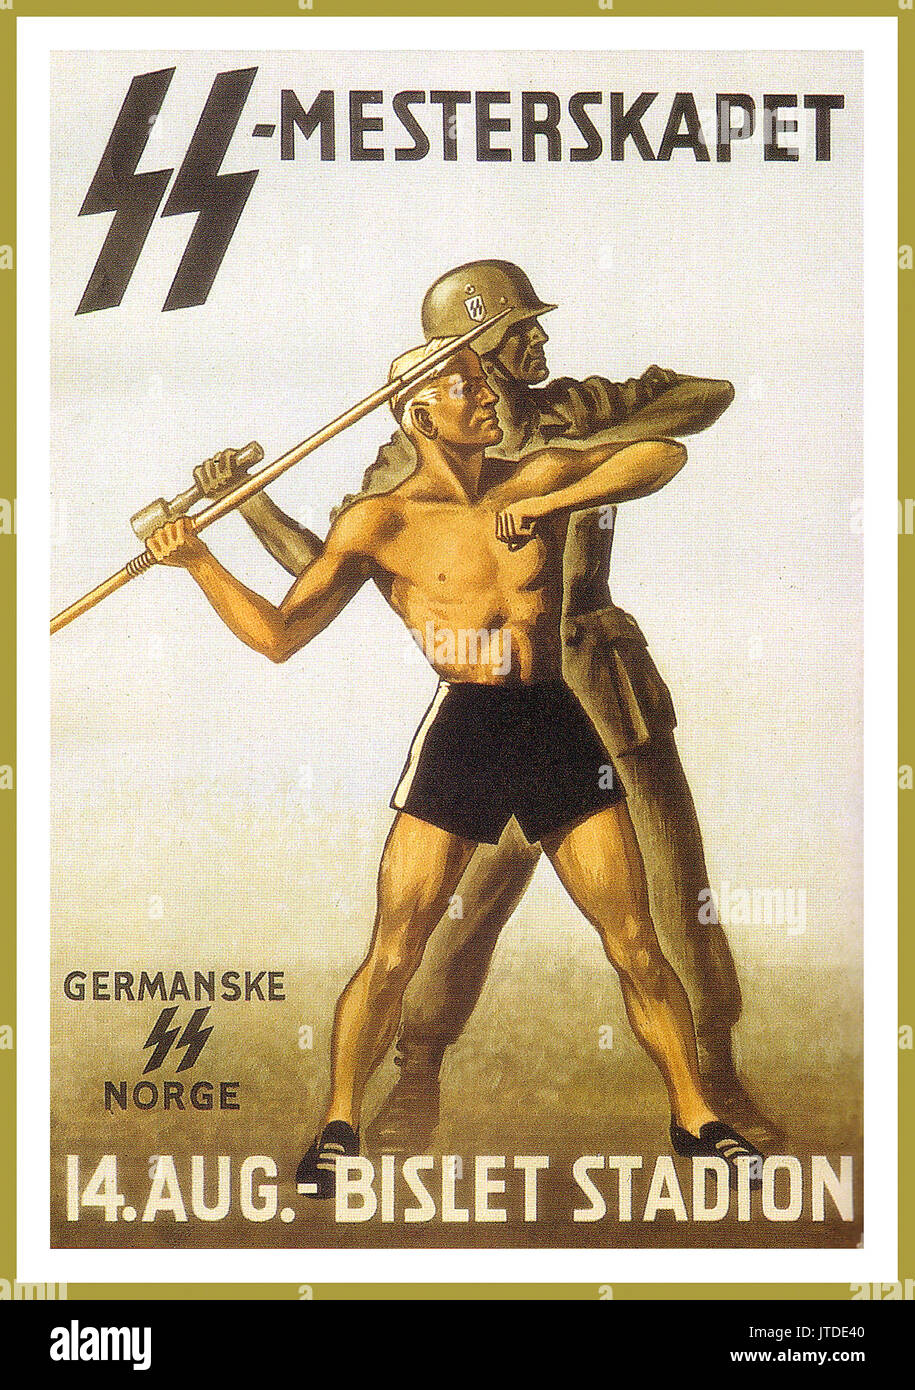 SS CHAMPIONSHIP ( SS mesterskapet) Vintage WW2 German propaganda poster for Norwegian Waffen SS  'SS Championship' at Bislet Stadium 14th August in Norway The Germanic SS (German: Germanische SS) was the collective name given to paramilitary and political organisations established in parts of German-occupied Europe between 1939 and 1945 under the auspices of the Schutzstaffel (SS). The units were modeled on the Allgemeine SS in Nazi Germany and established in Belgium, Denmark, the Netherlands, and Norway whose populations were considered in Nazi ideology to be especially 'racially suitable'. Stock Photo